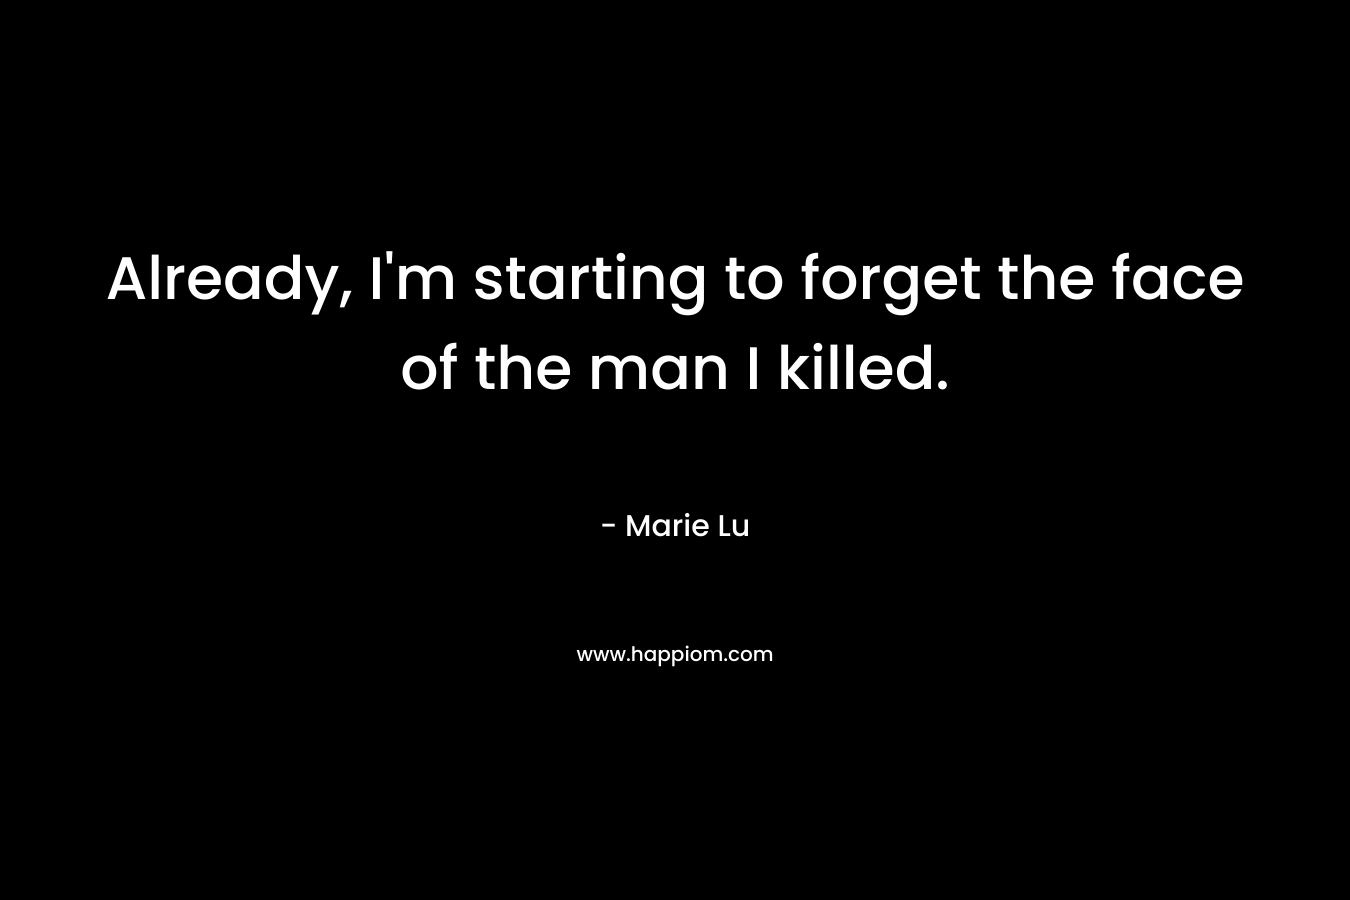 Already, I’m starting to forget the face of the man I killed. – Marie Lu